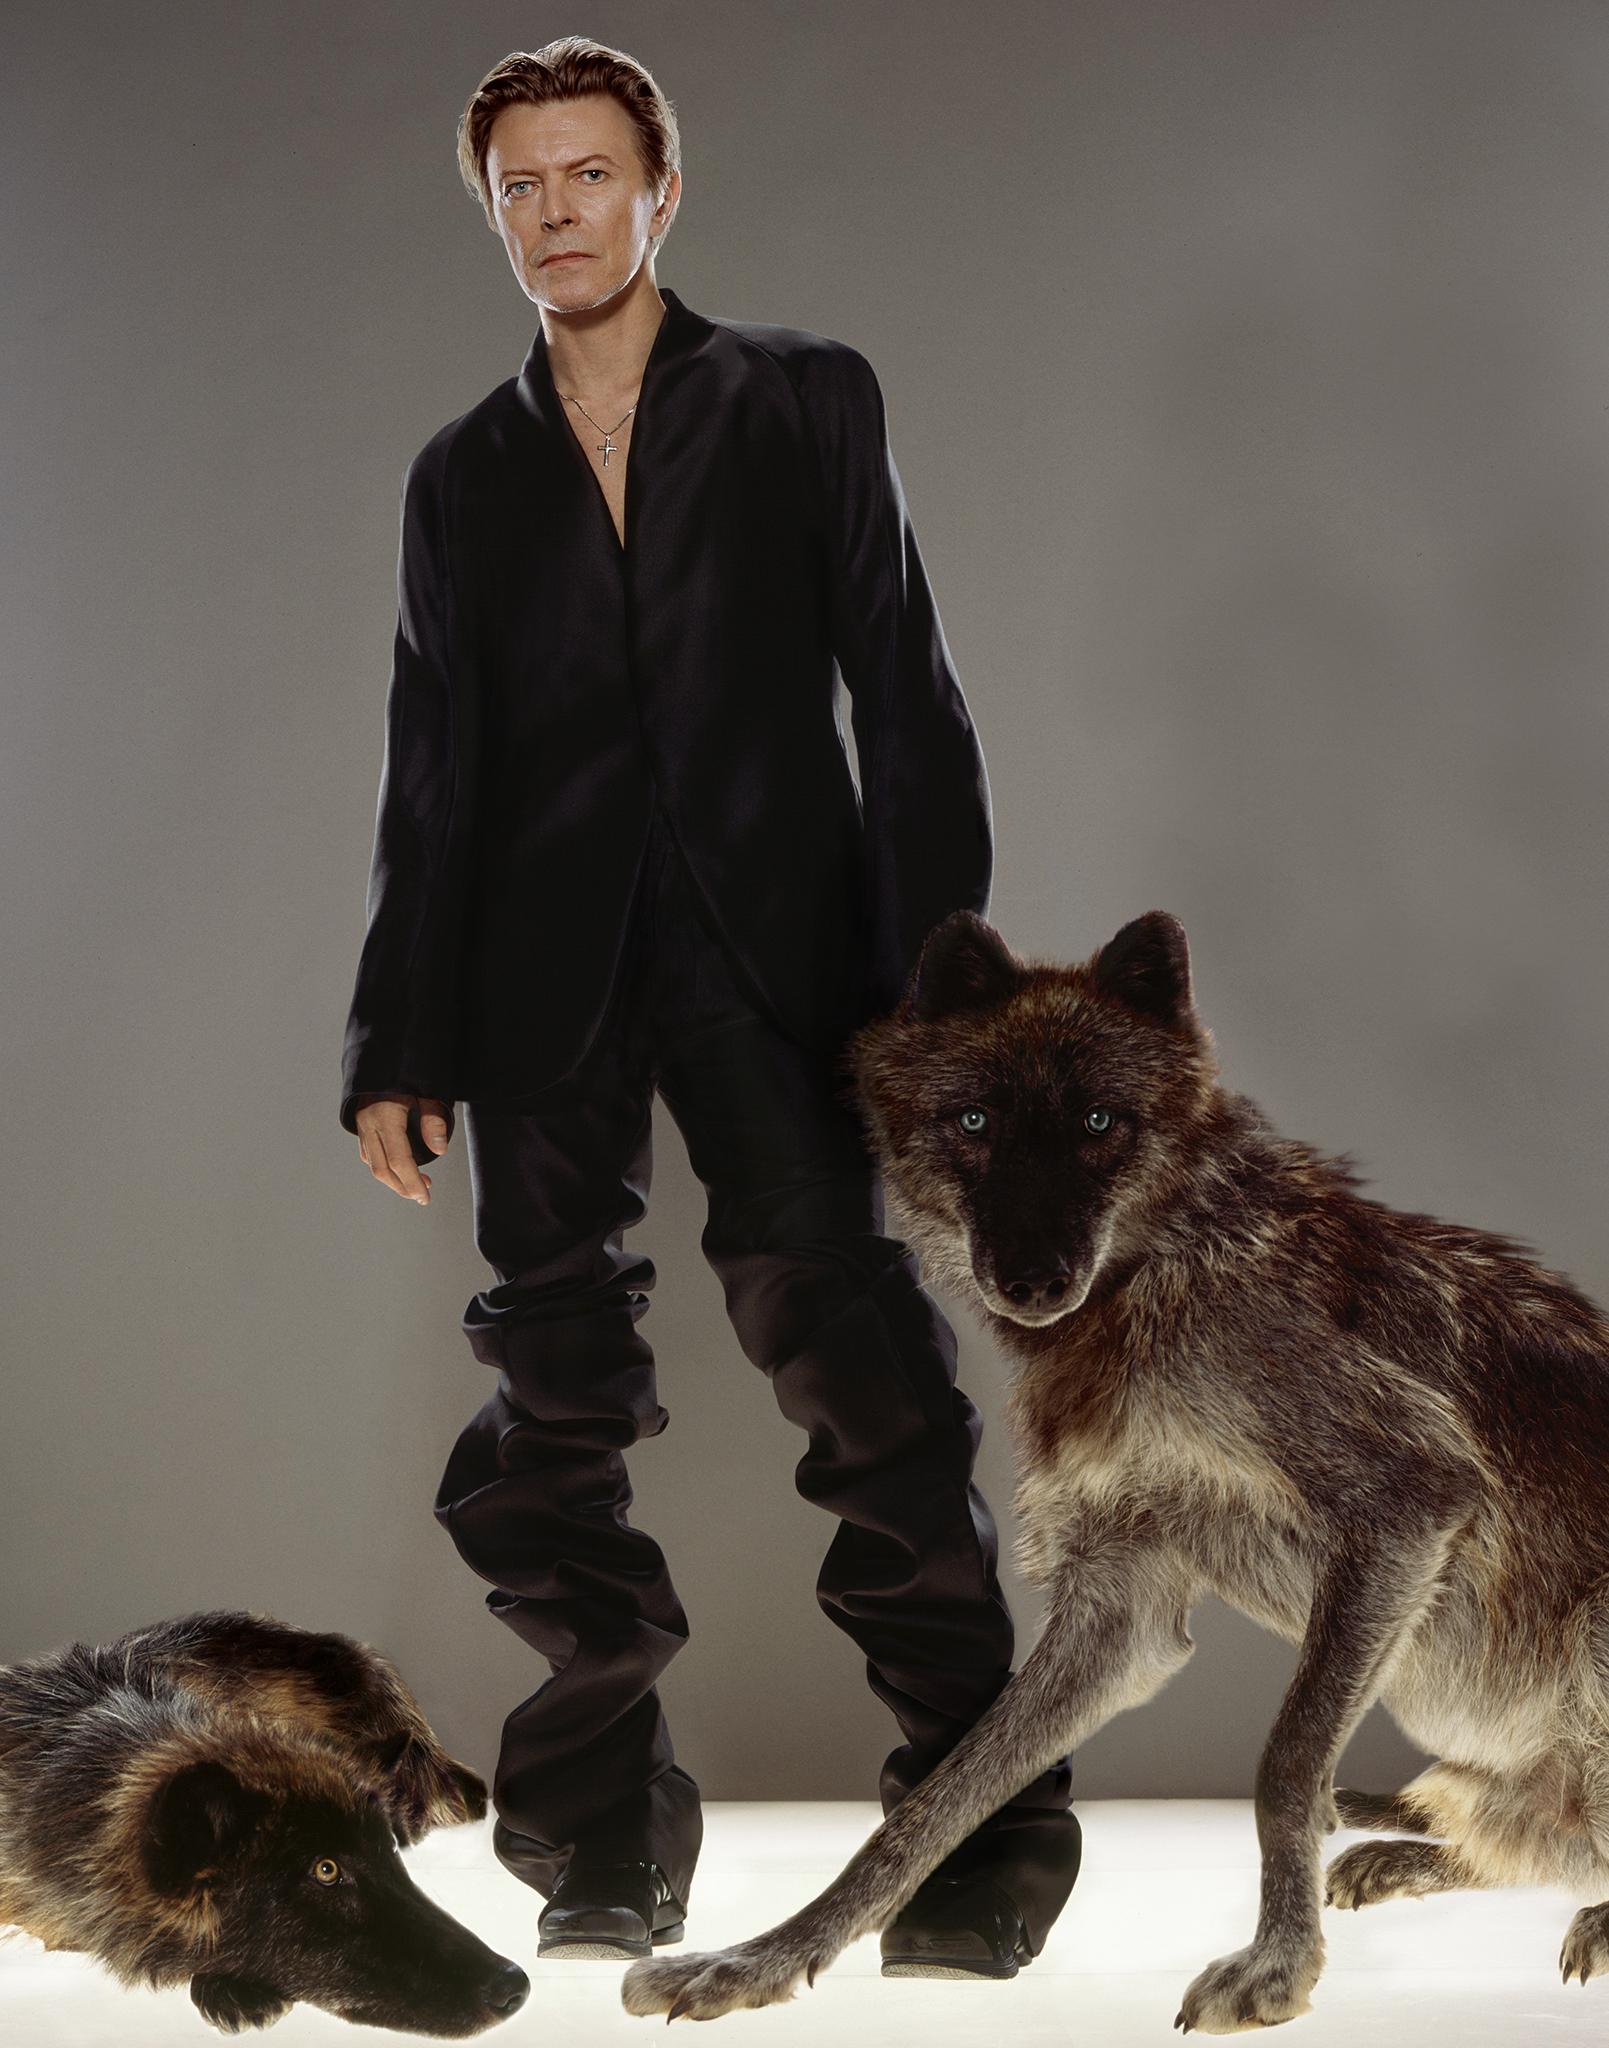 Museum quality fine art print of David Bowie by photographer Markus Klinko, from his celebrated collection "Bowie Unseen", released for the first time in 2016.

This stunning shot of David Bowie with a wolf is from a shoot for British GQ Magazine in